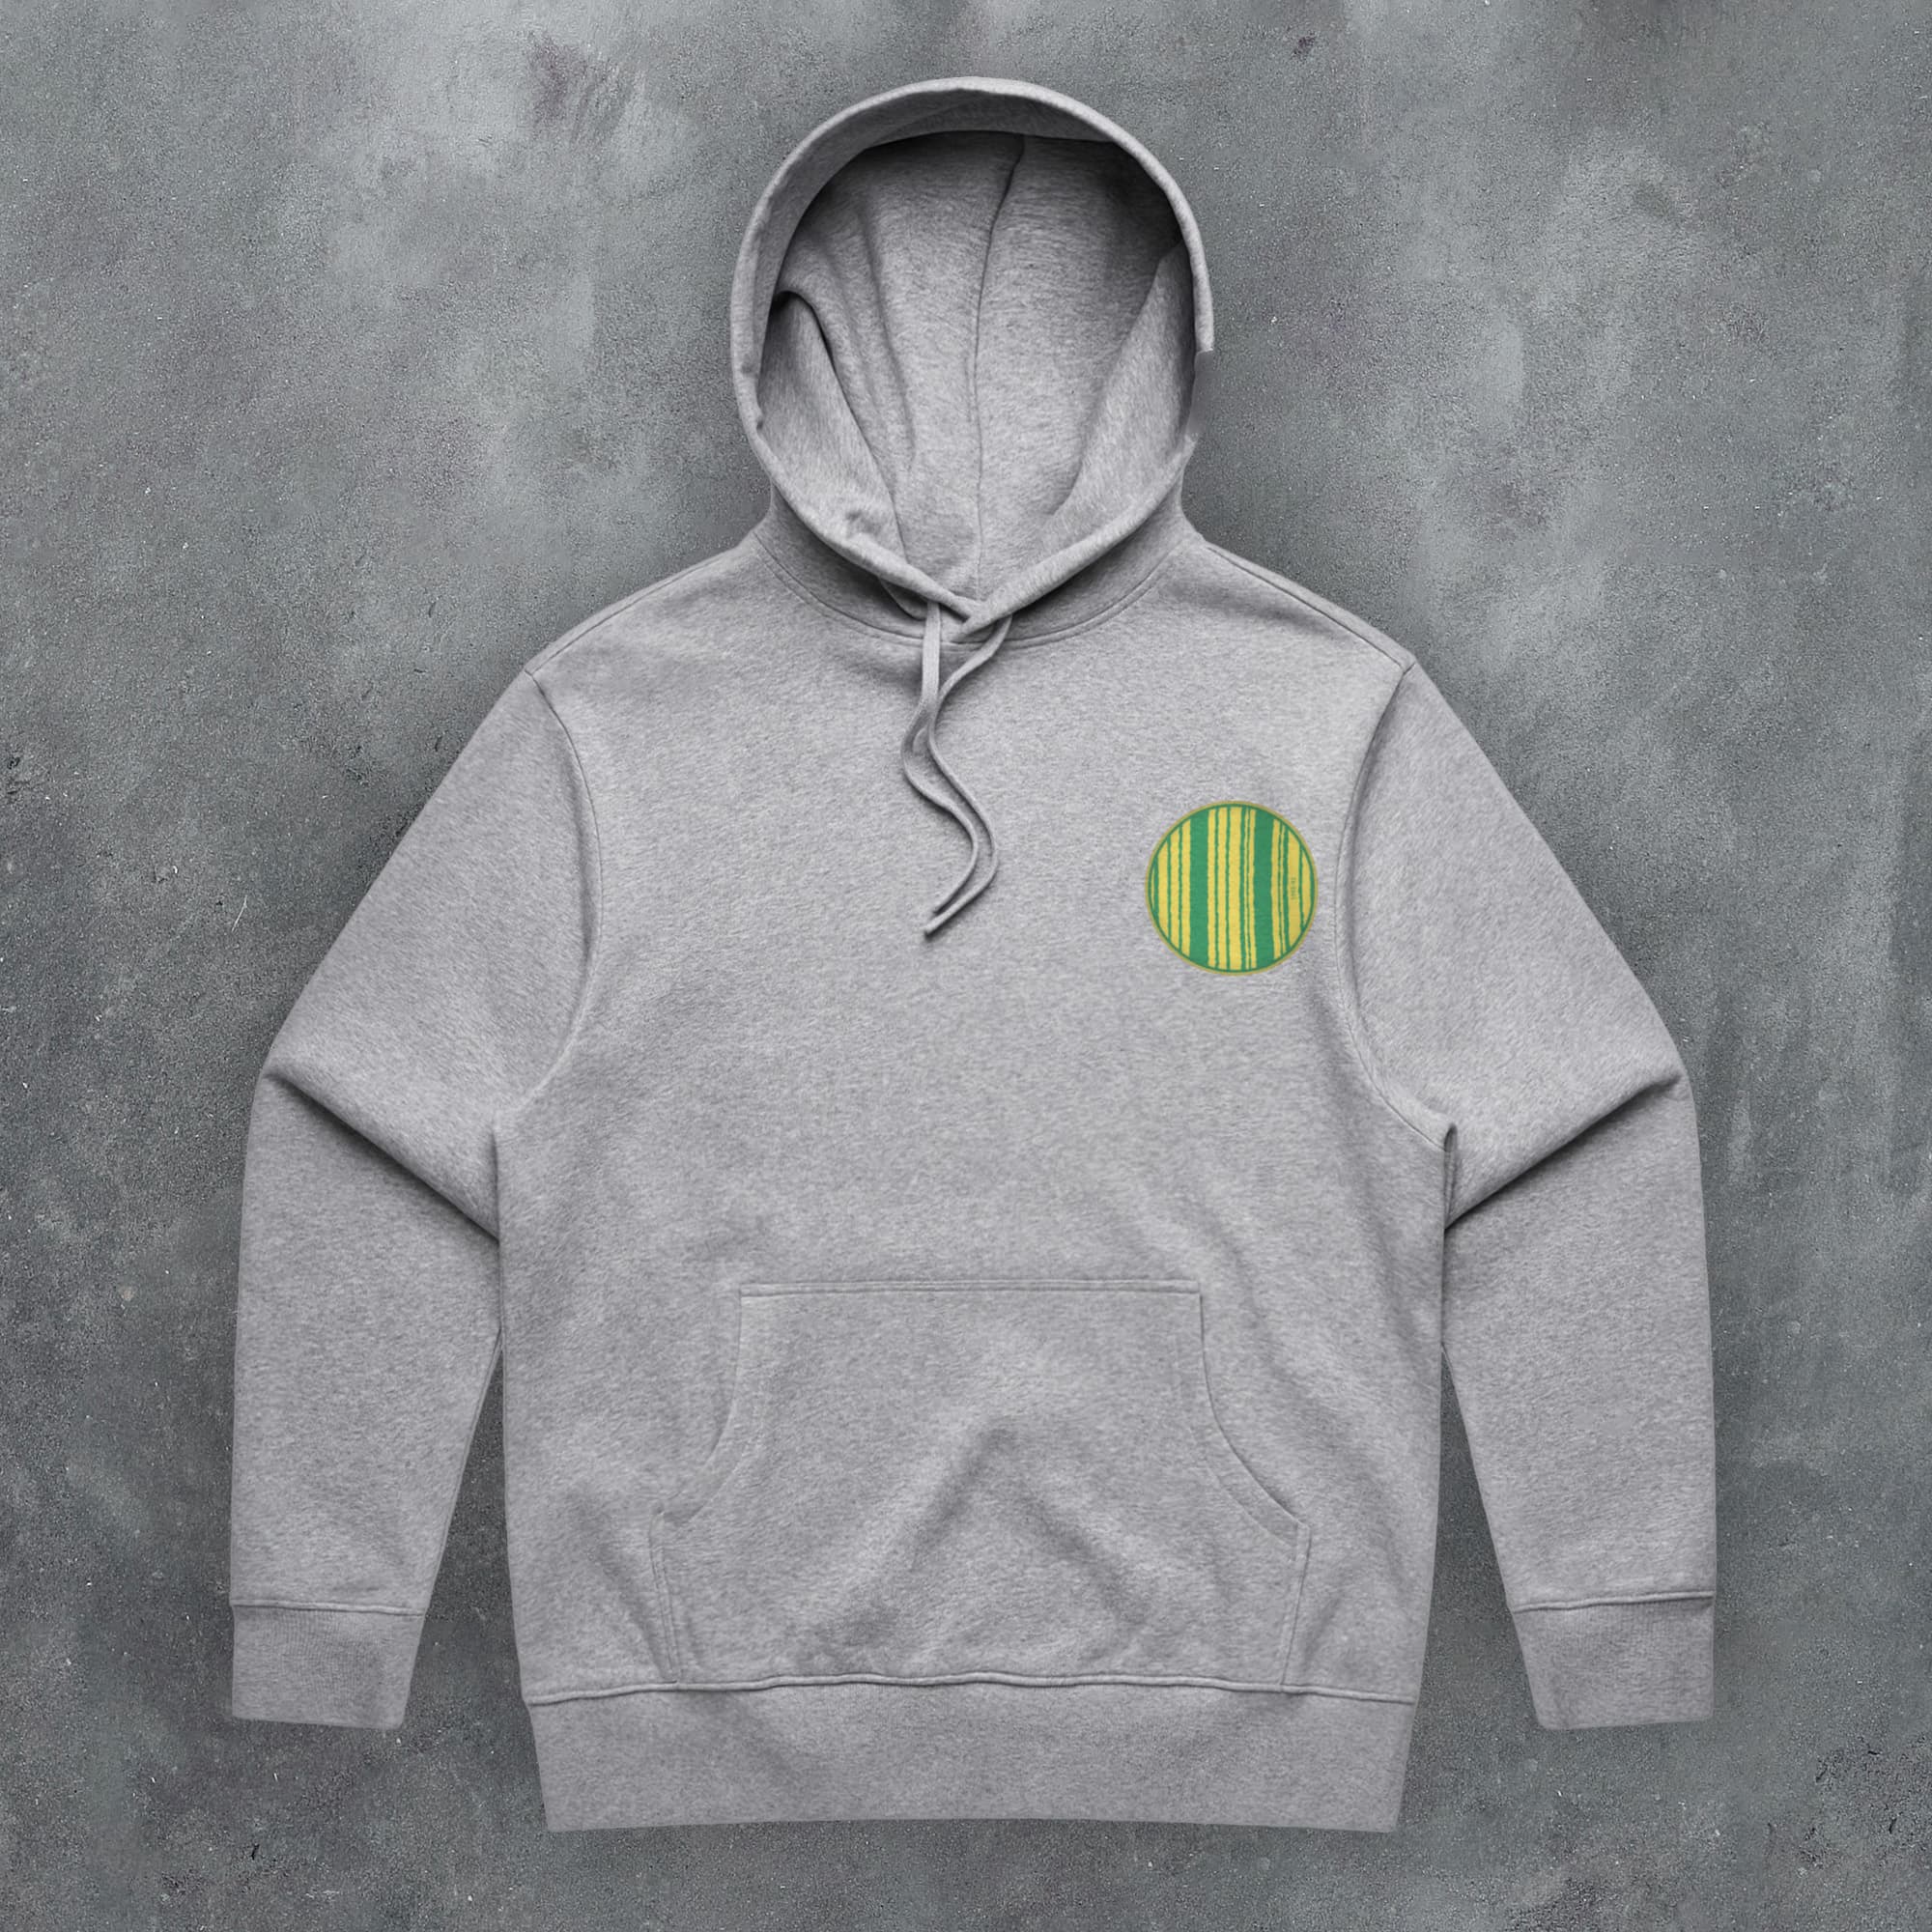 a grey hoodie with a green and yellow stripe on it